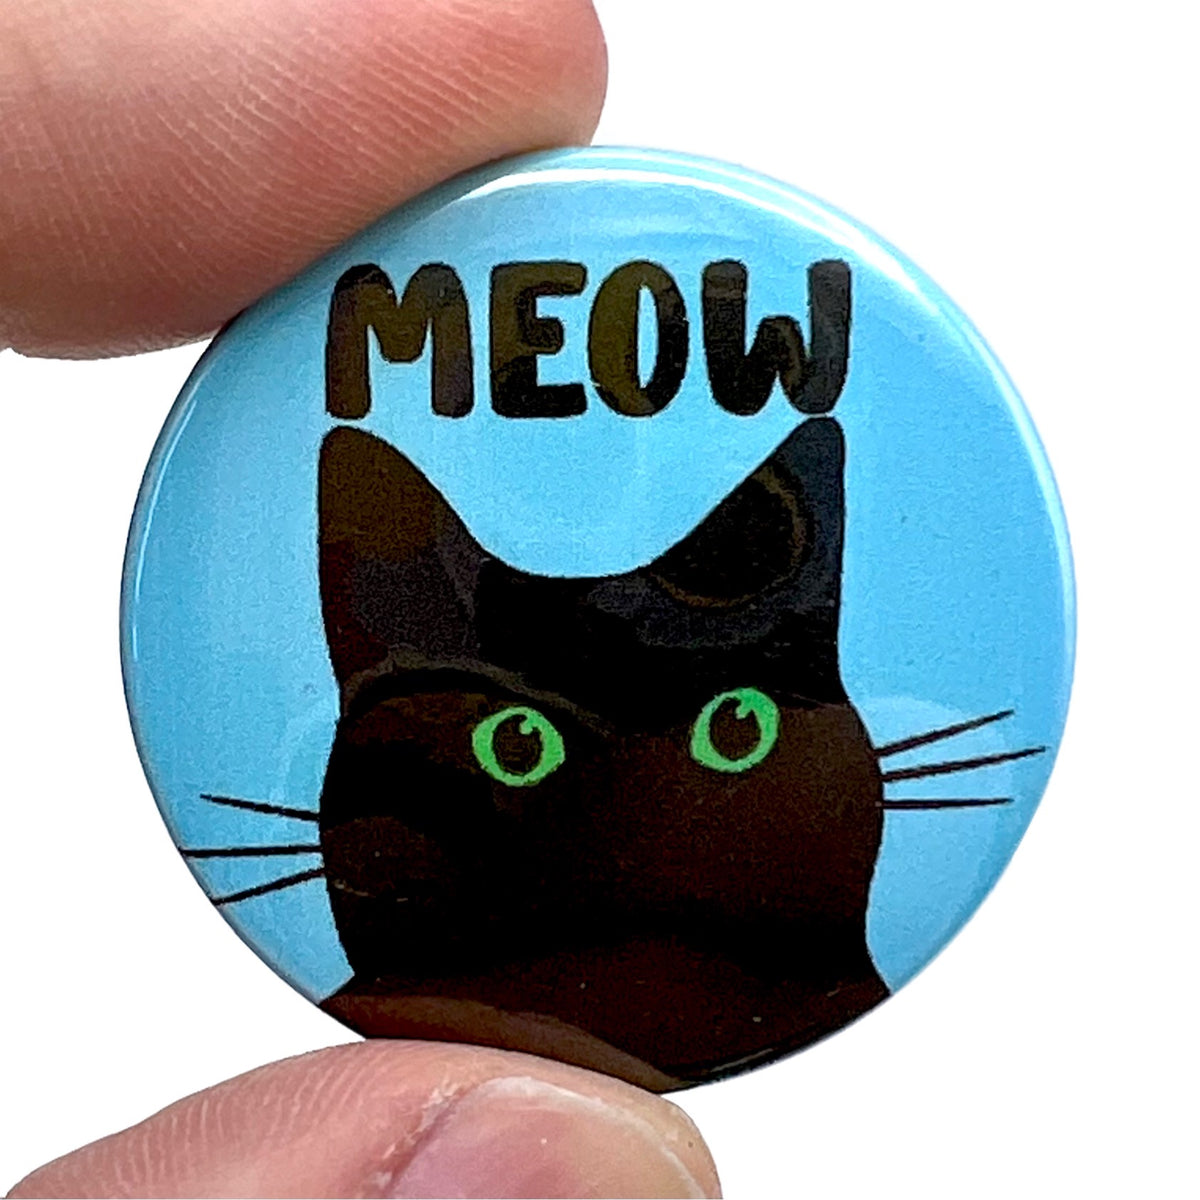 Meow Black Cat Pink Button - Home